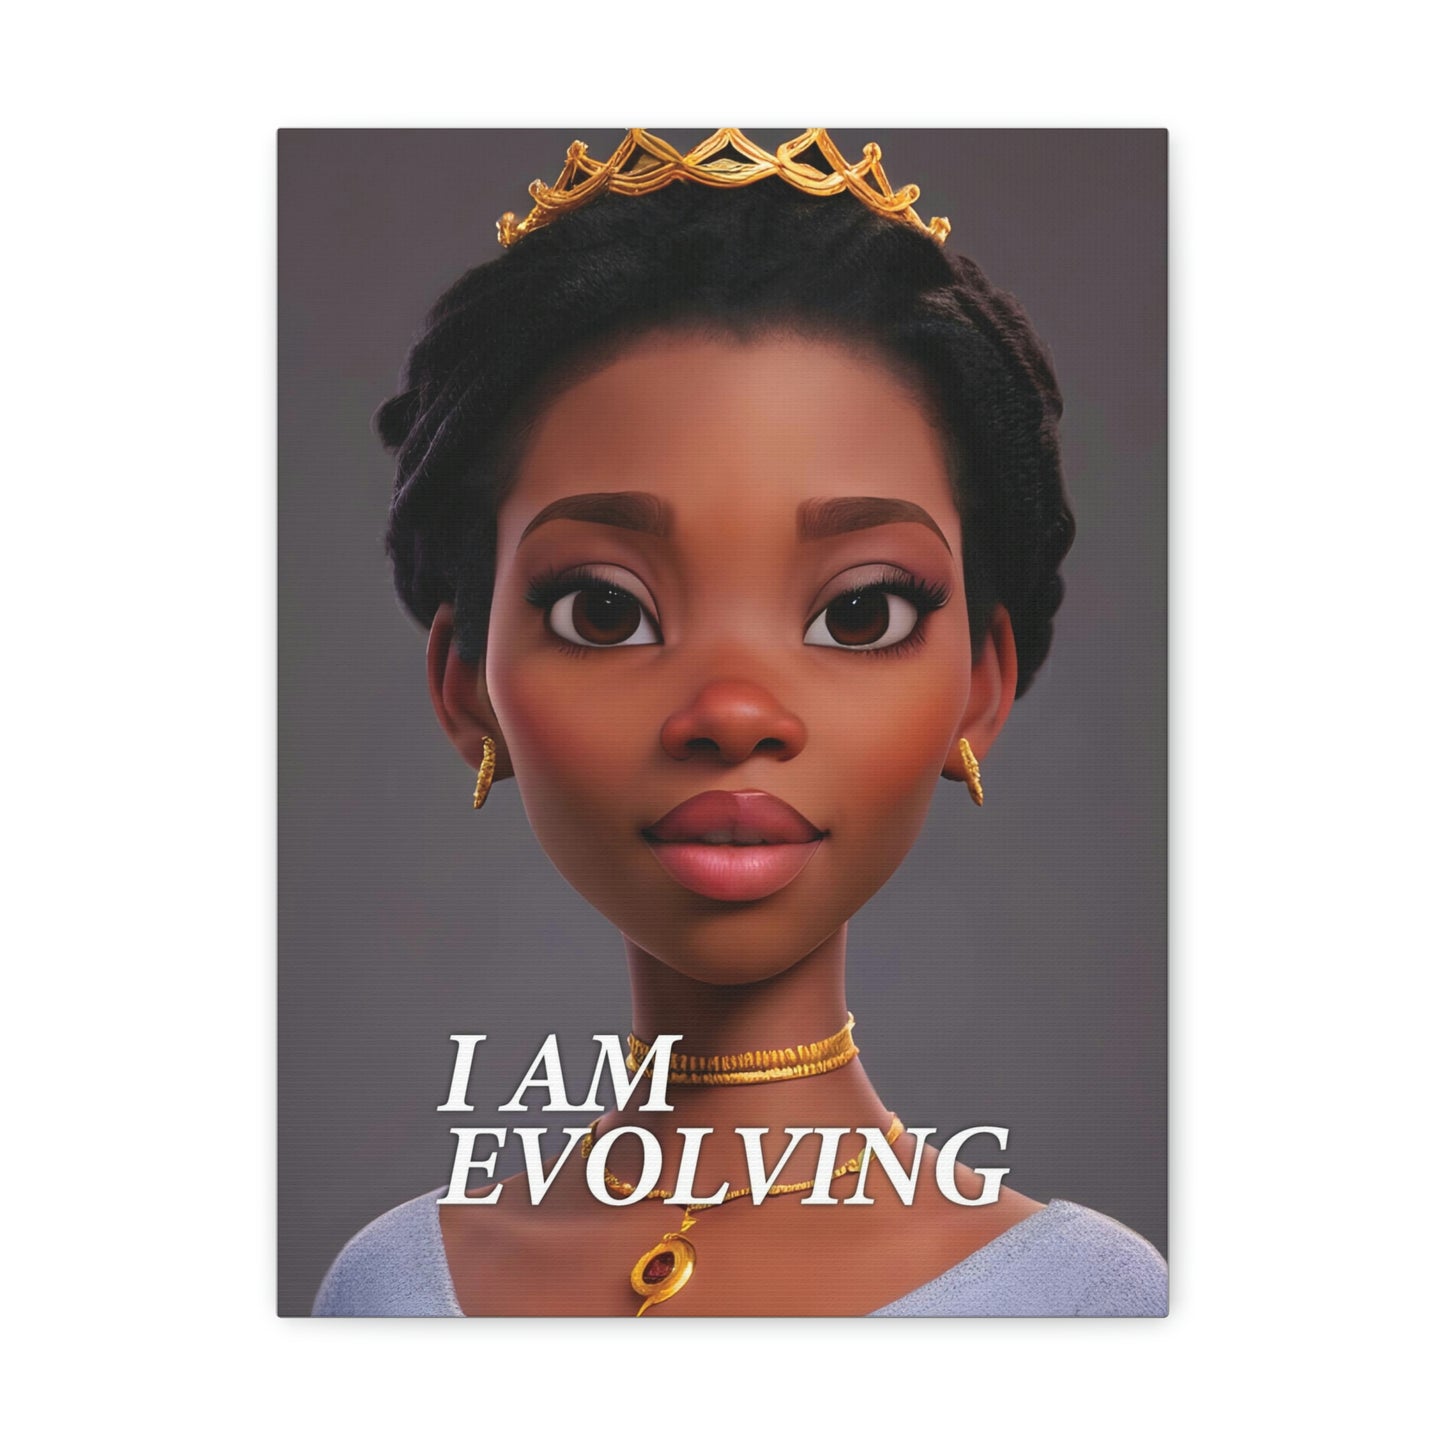 I Am Evolving: Celebrating Growth and Transformation